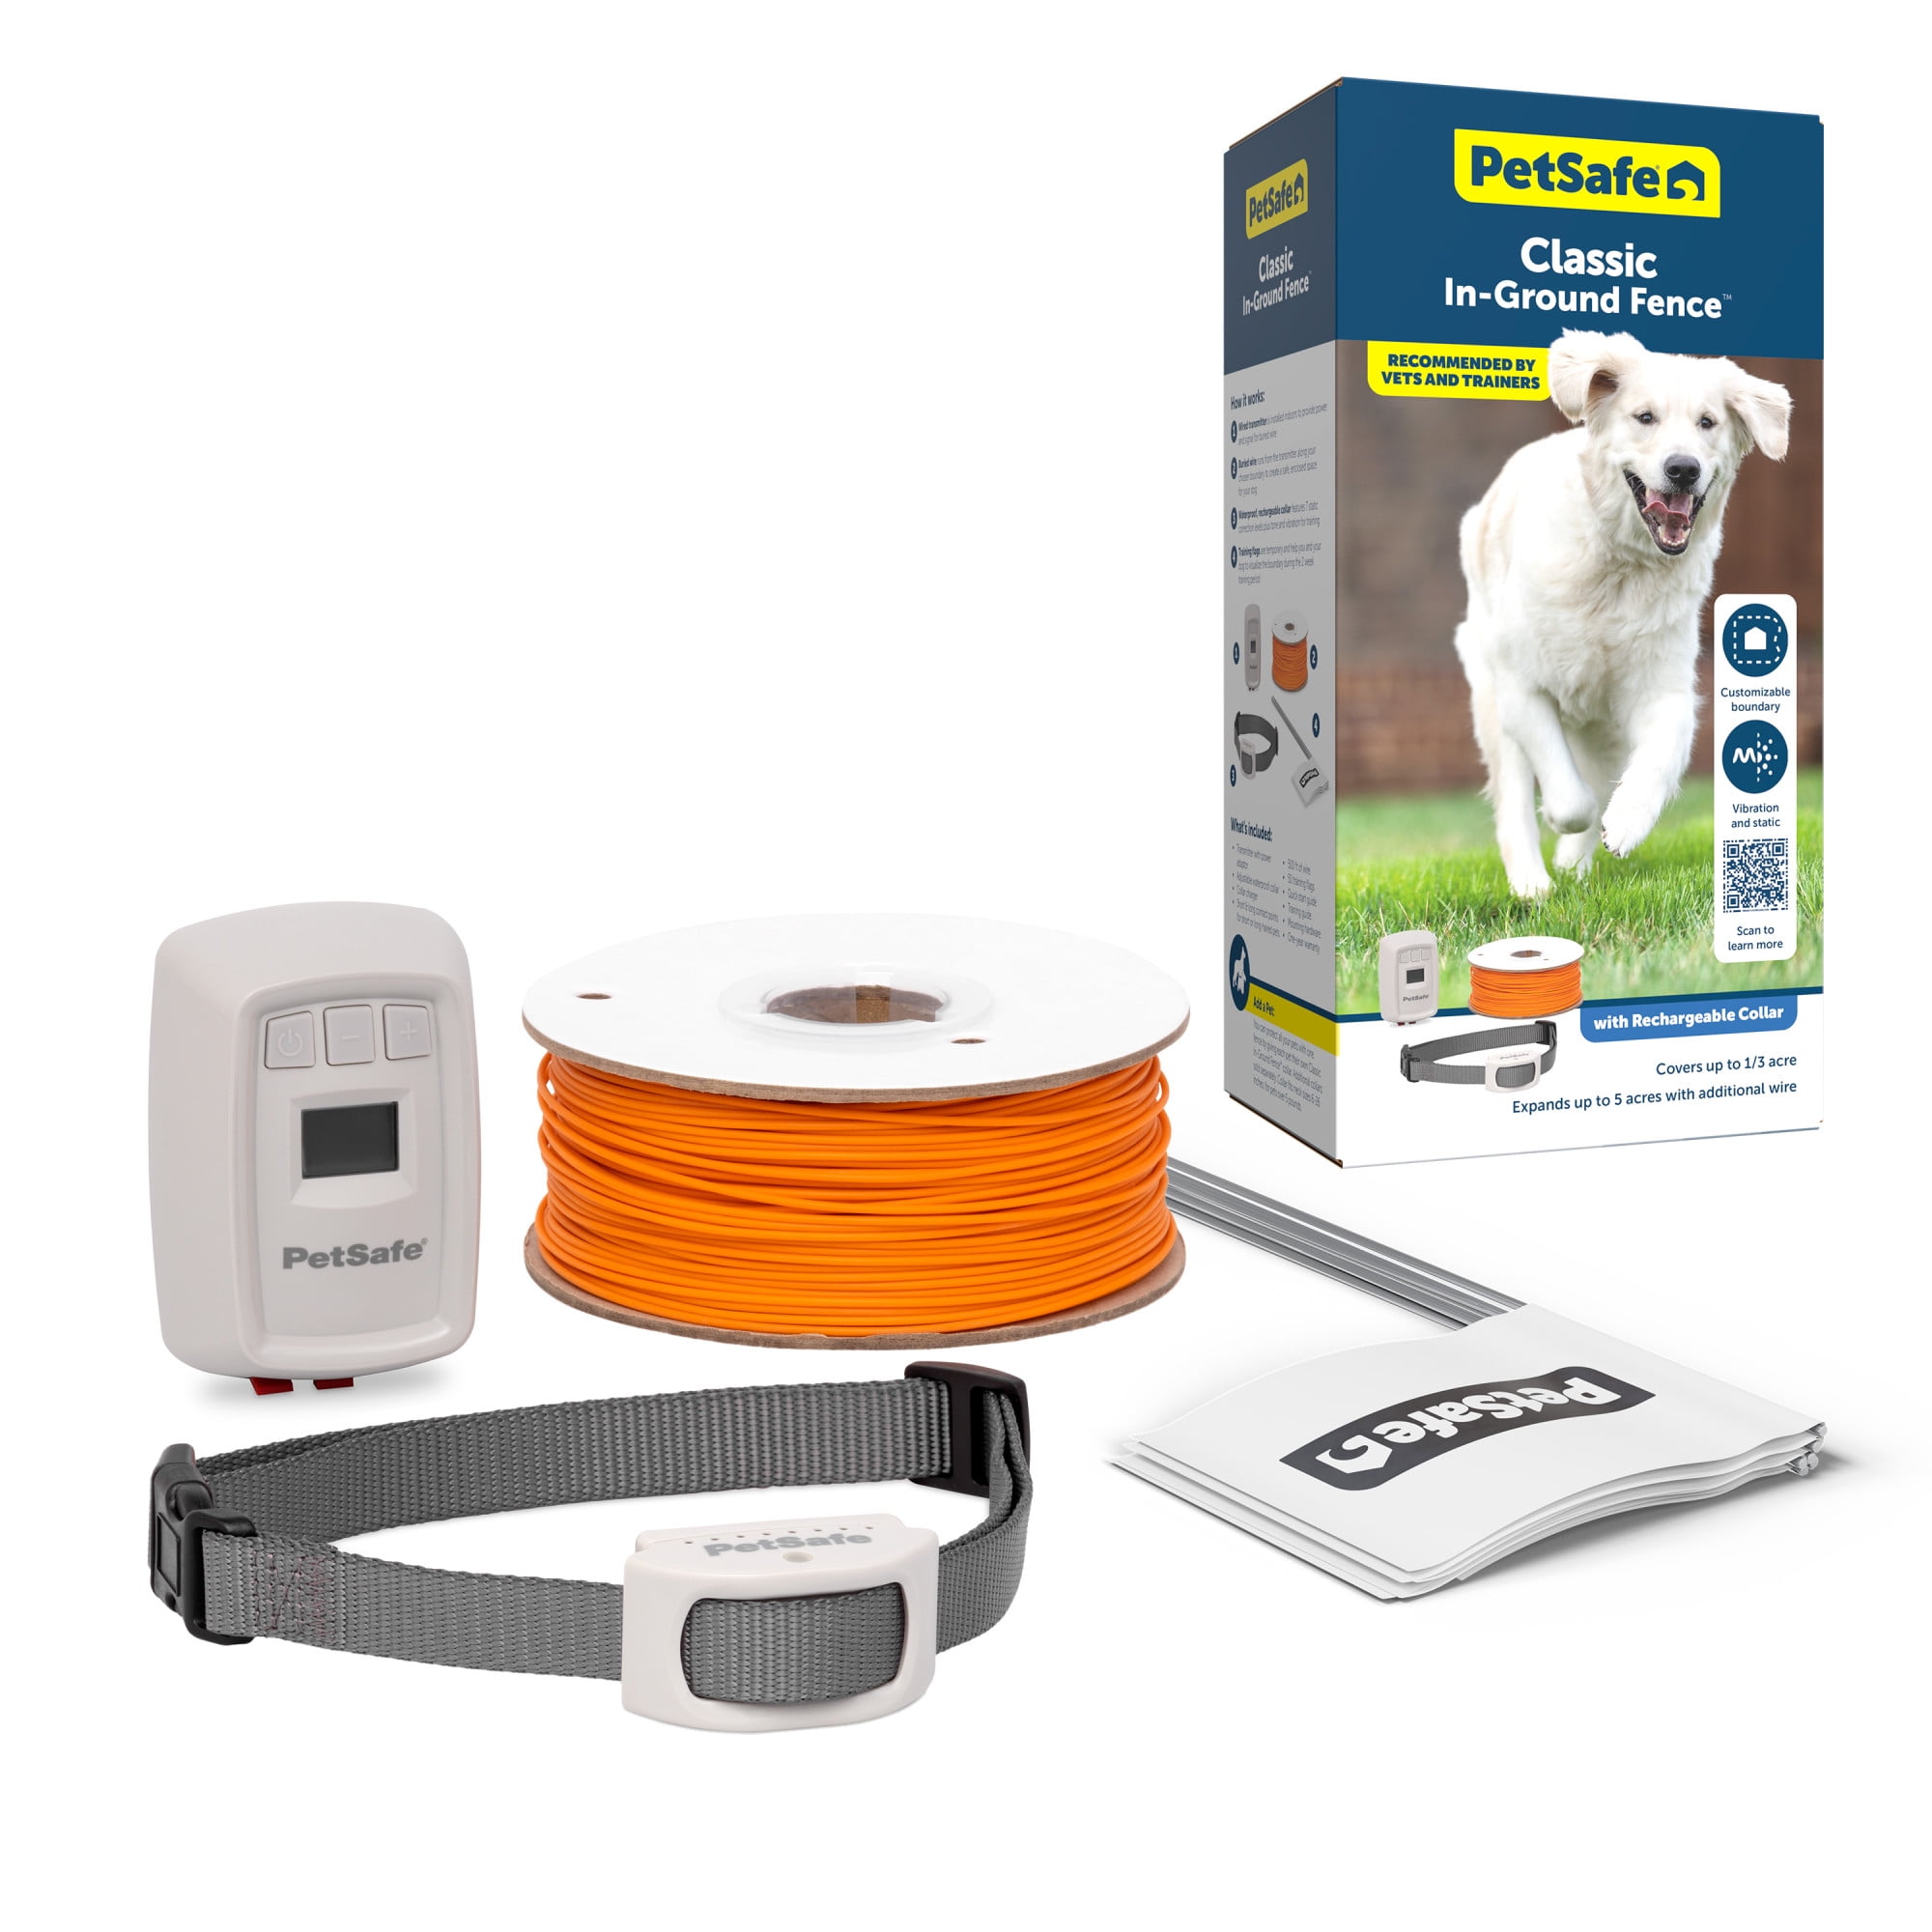 PetSafeClassic In-Ground Fence for Dogs and Cats - From the Parent